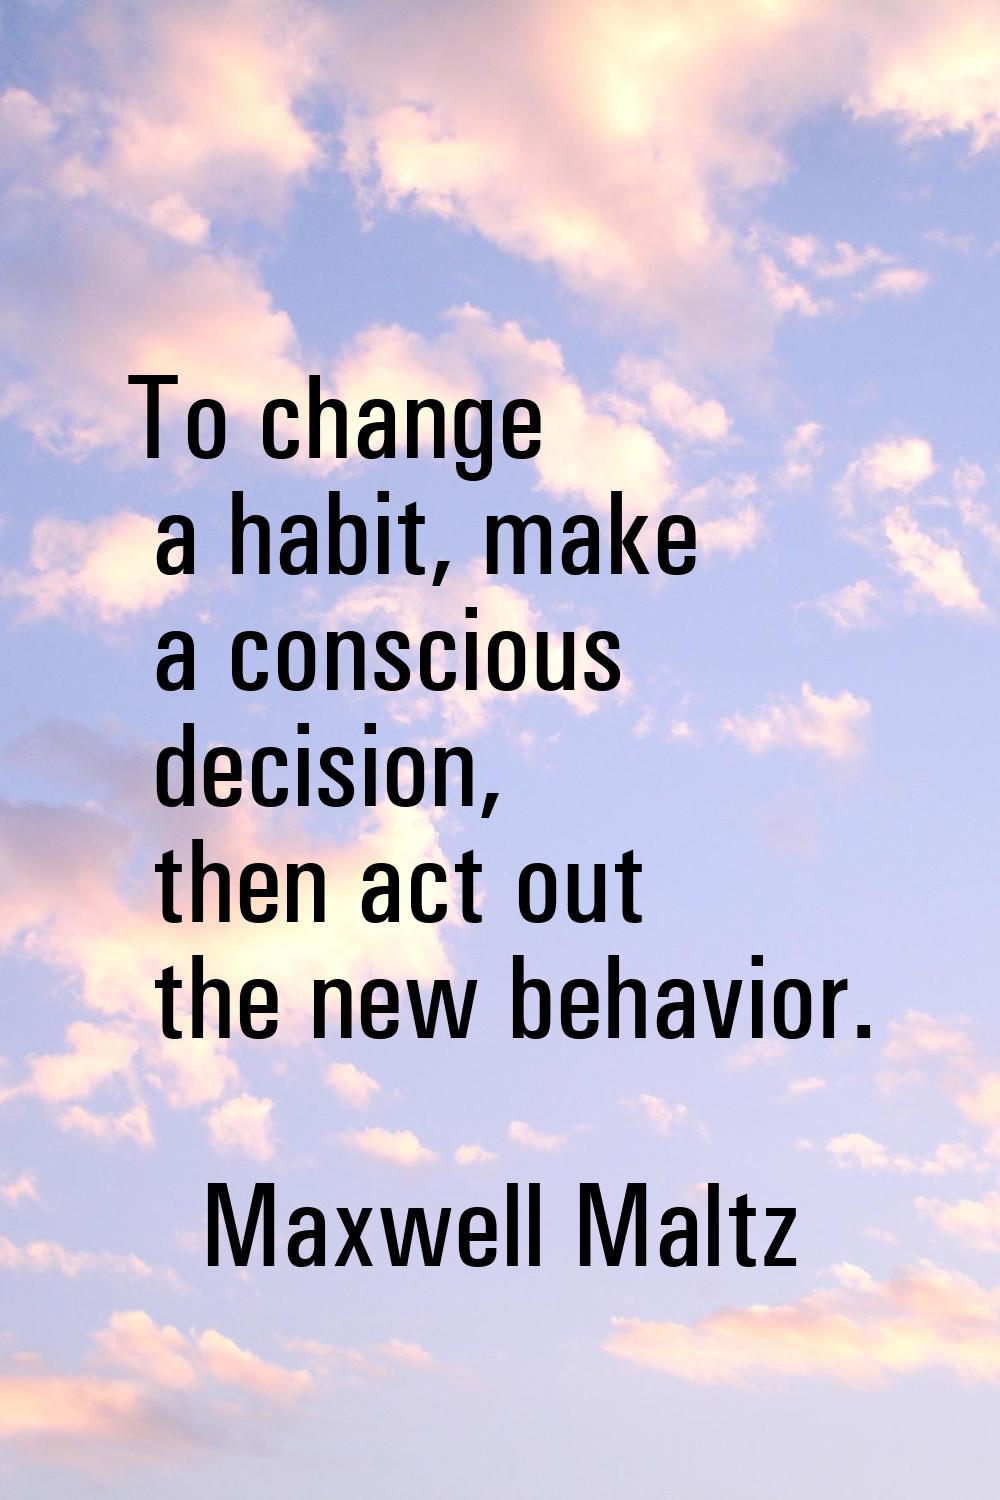 To change a habit, make a conscious decision, then act out the new behavior.